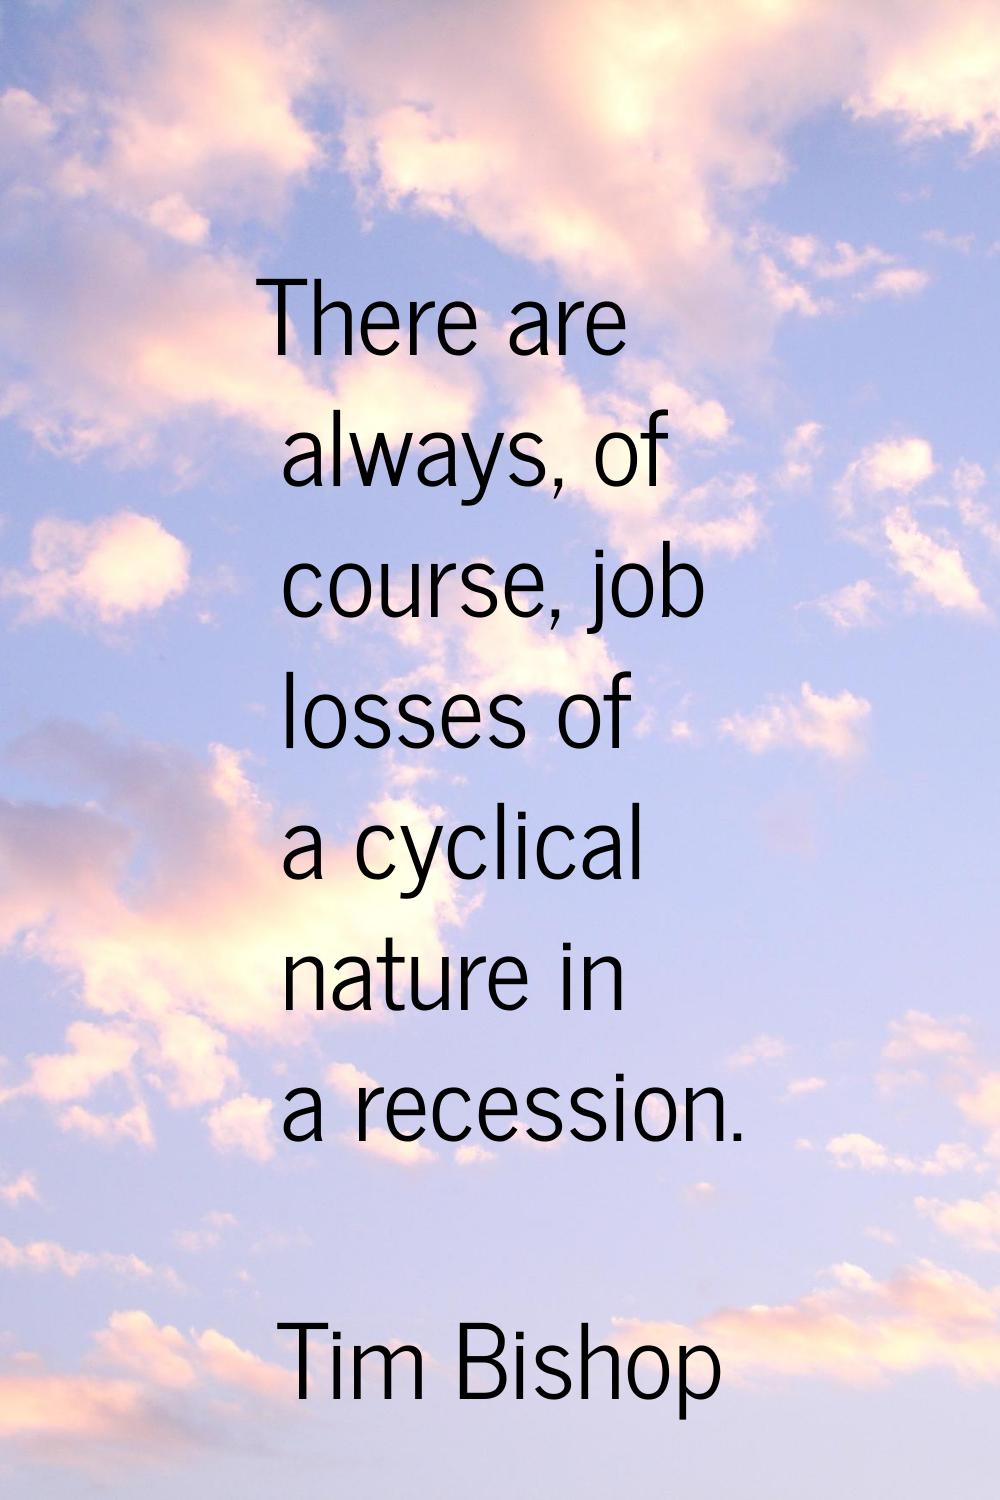 There are always, of course, job losses of a cyclical nature in a recession.